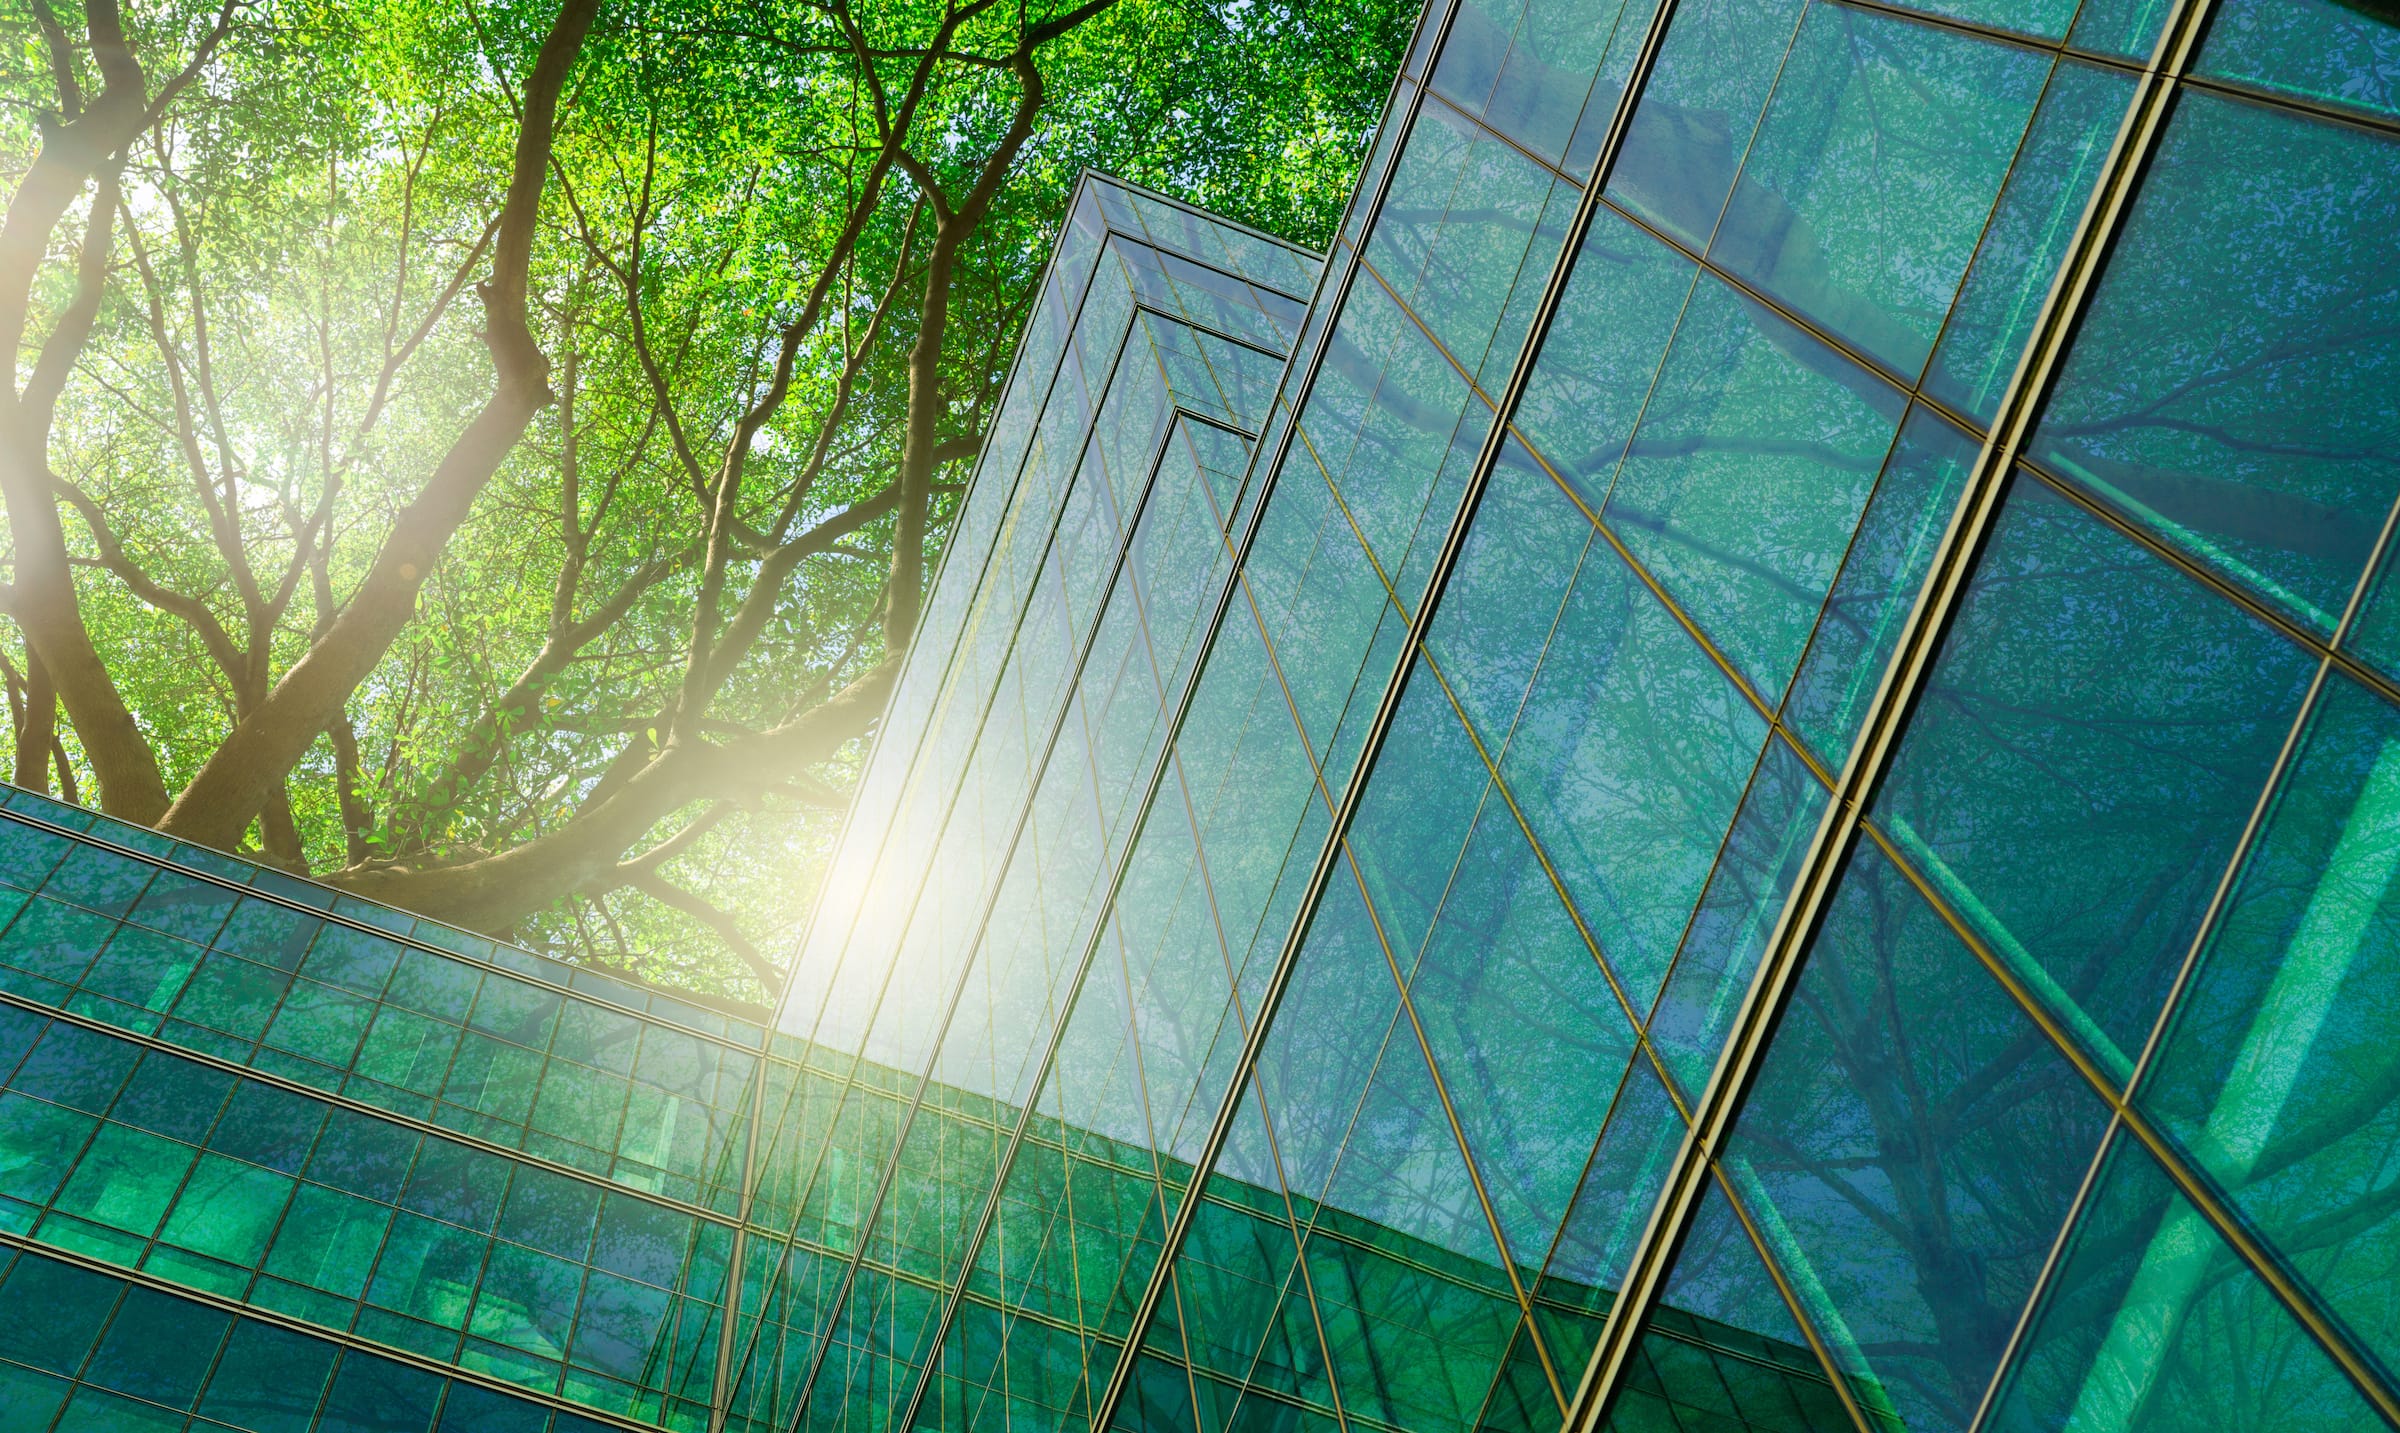 Image of glass building with tree canopy above